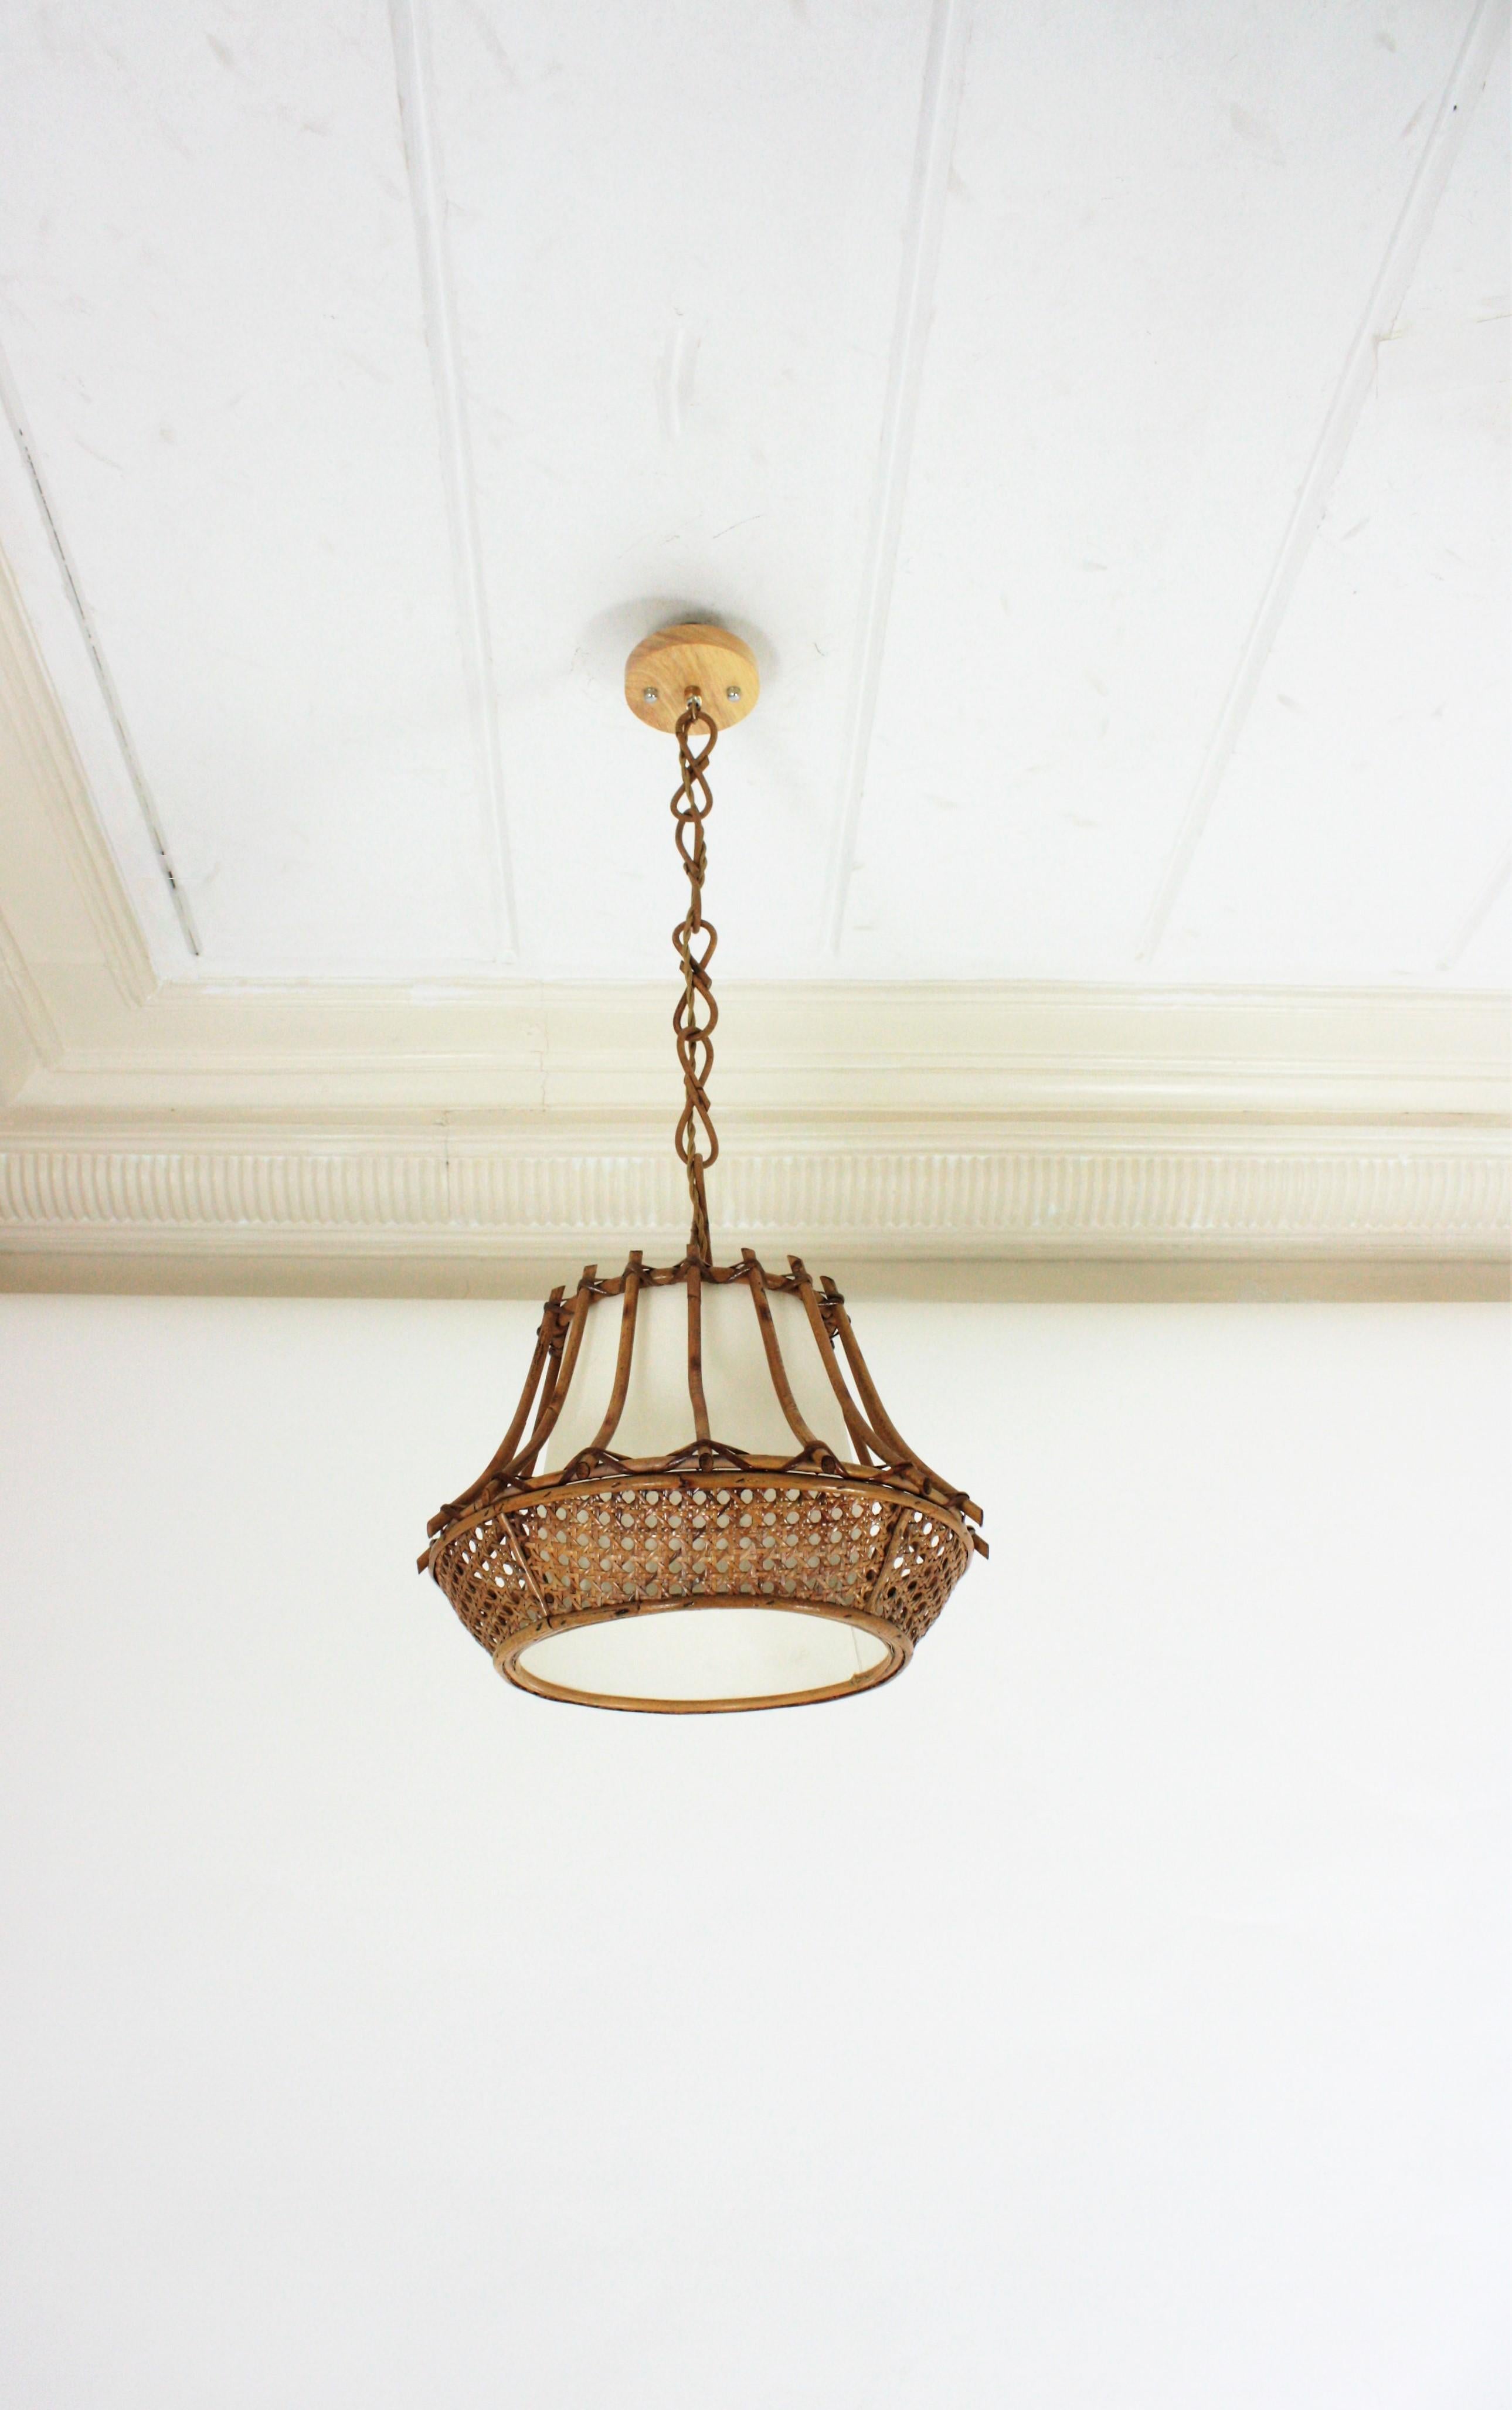 Hand-Crafted Rattan Wicker Pagoda Pendant Light or Lantern For Sale